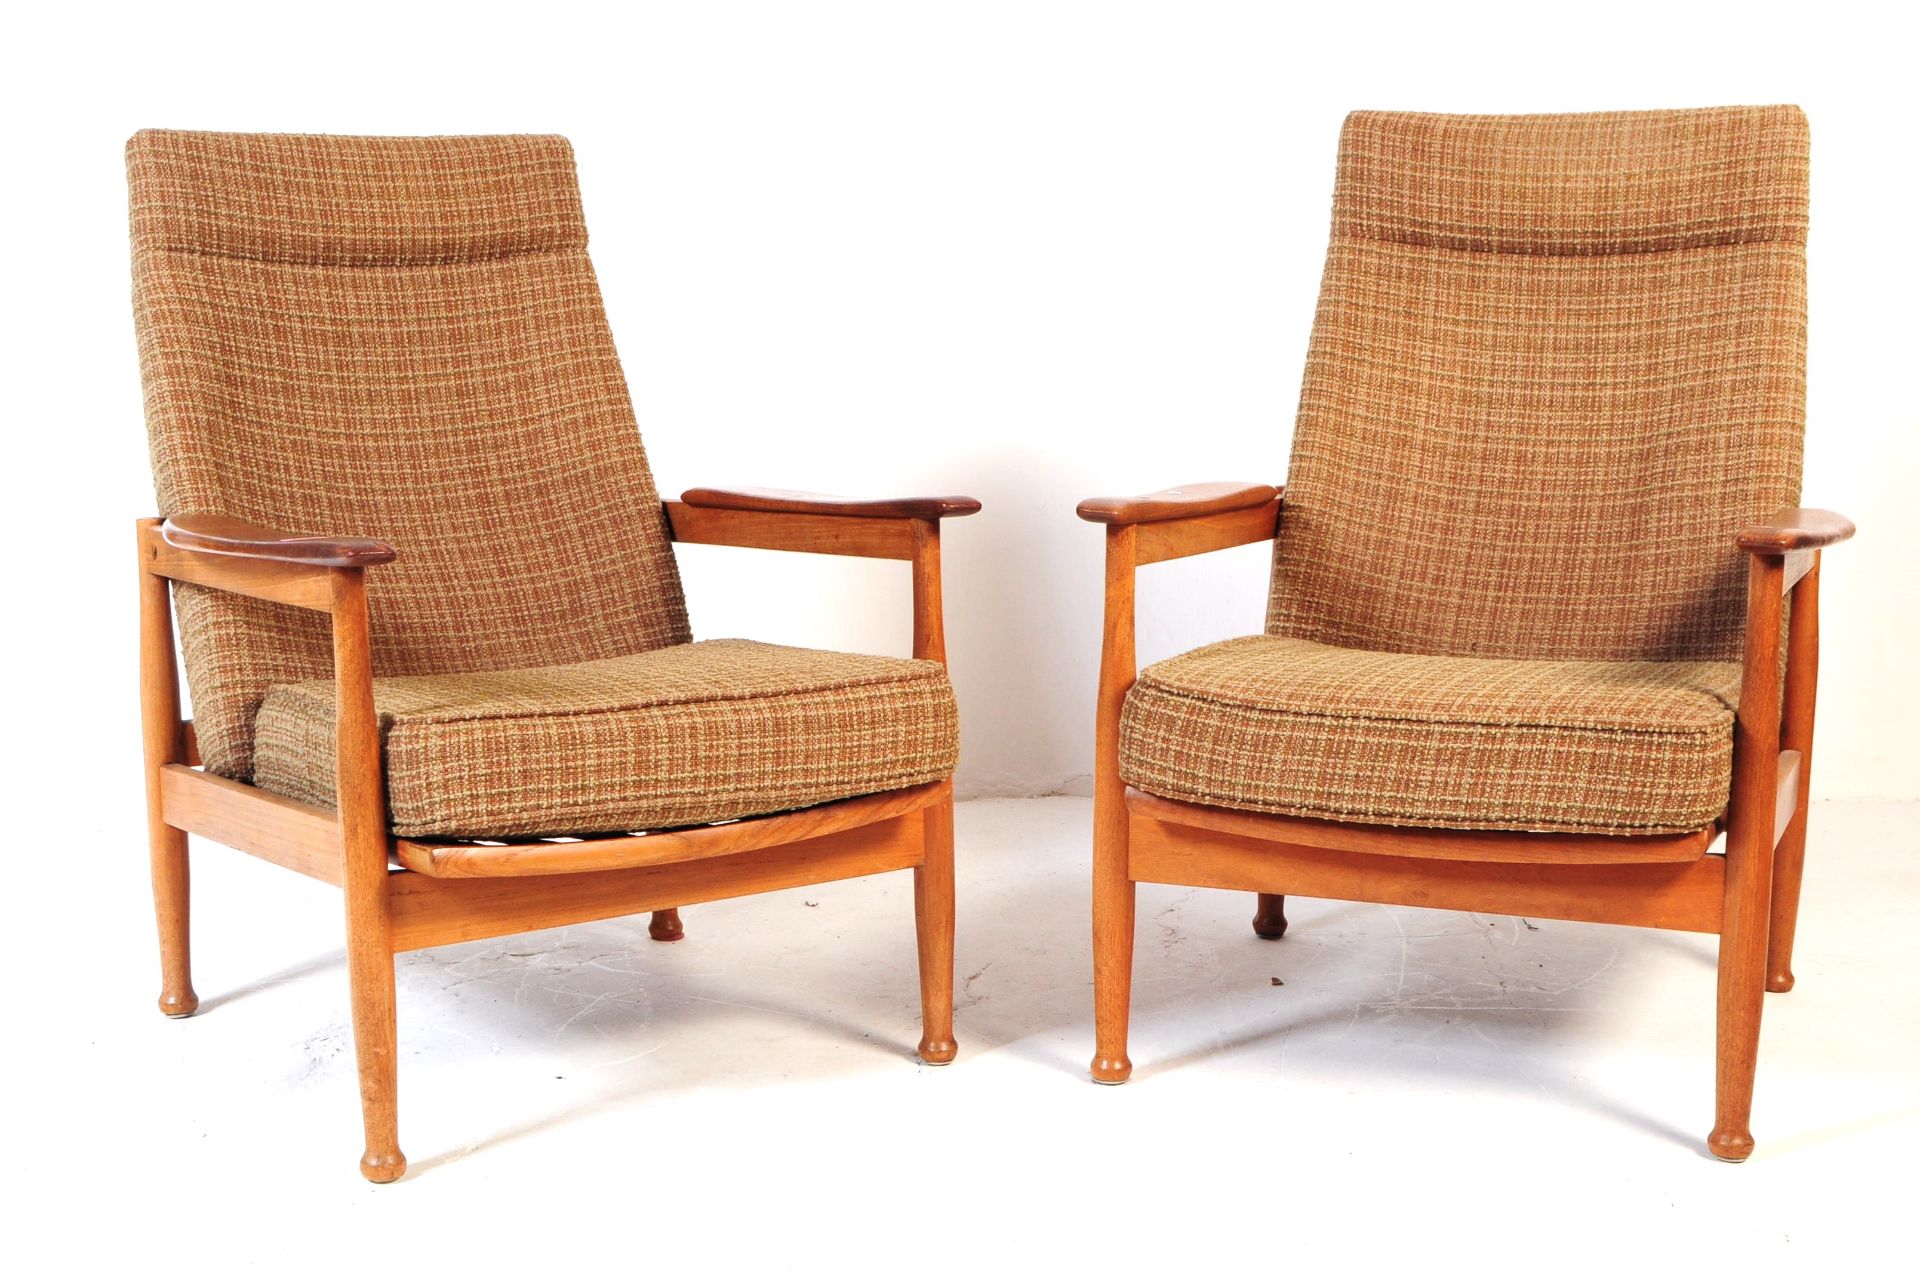 PARKER KNOLL - PAIR OF RETRO MID 20TH CENTURY ARMCHAIRS